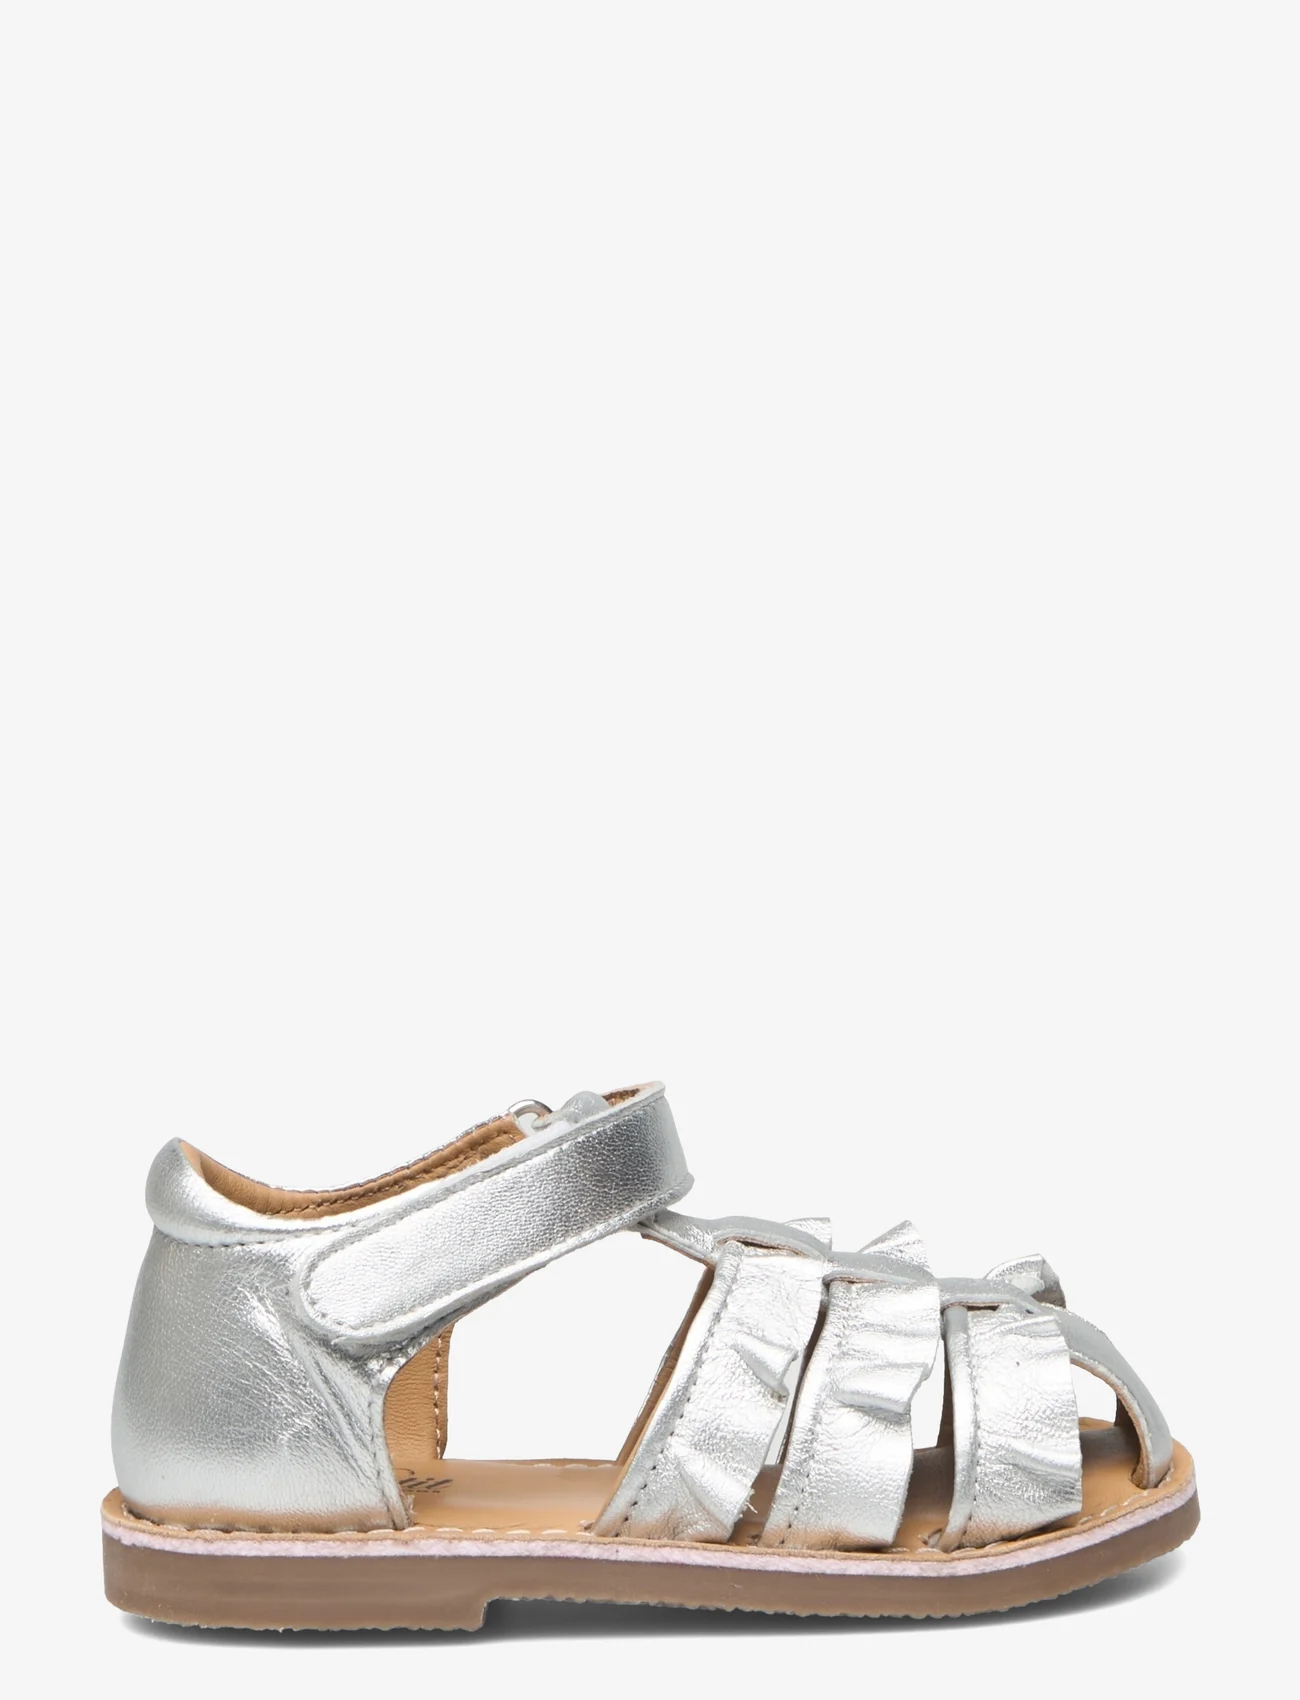 Sofie Schnoor Baby and Kids - Sandal - sommarfynd - silver - 1